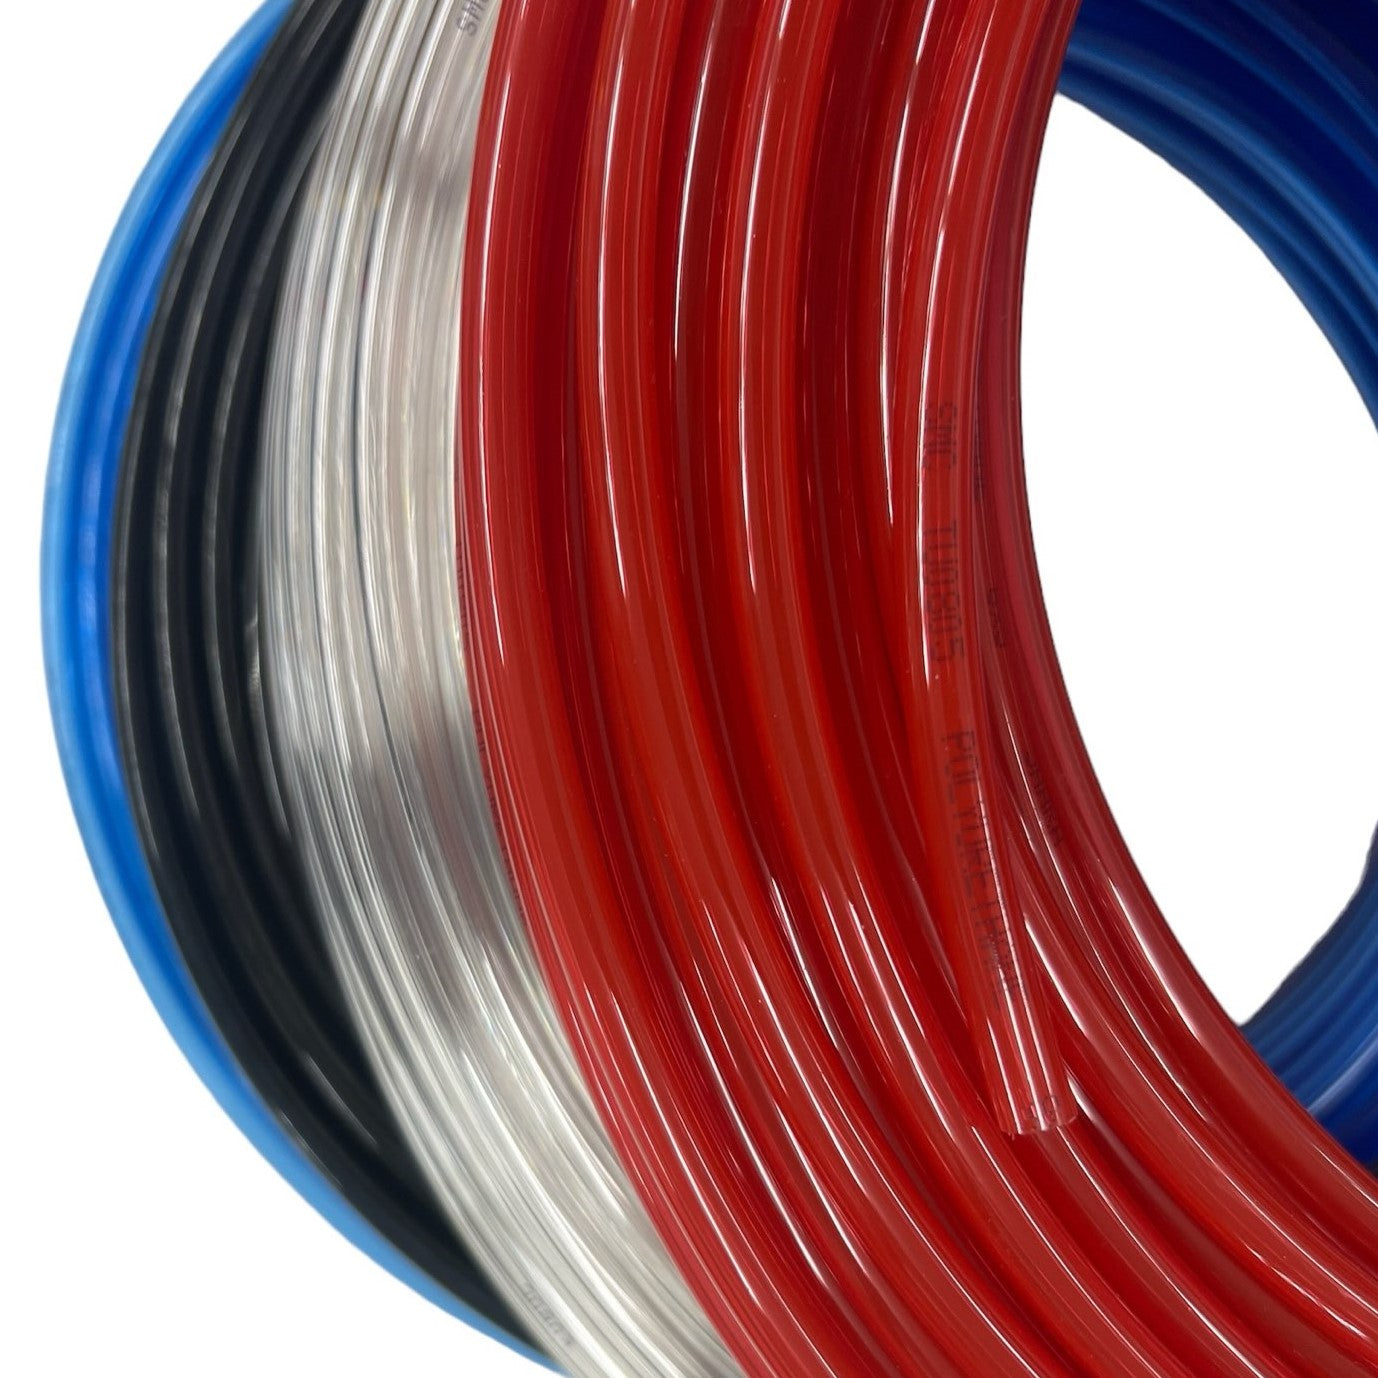 8mm OD Air Line Tubing-Red